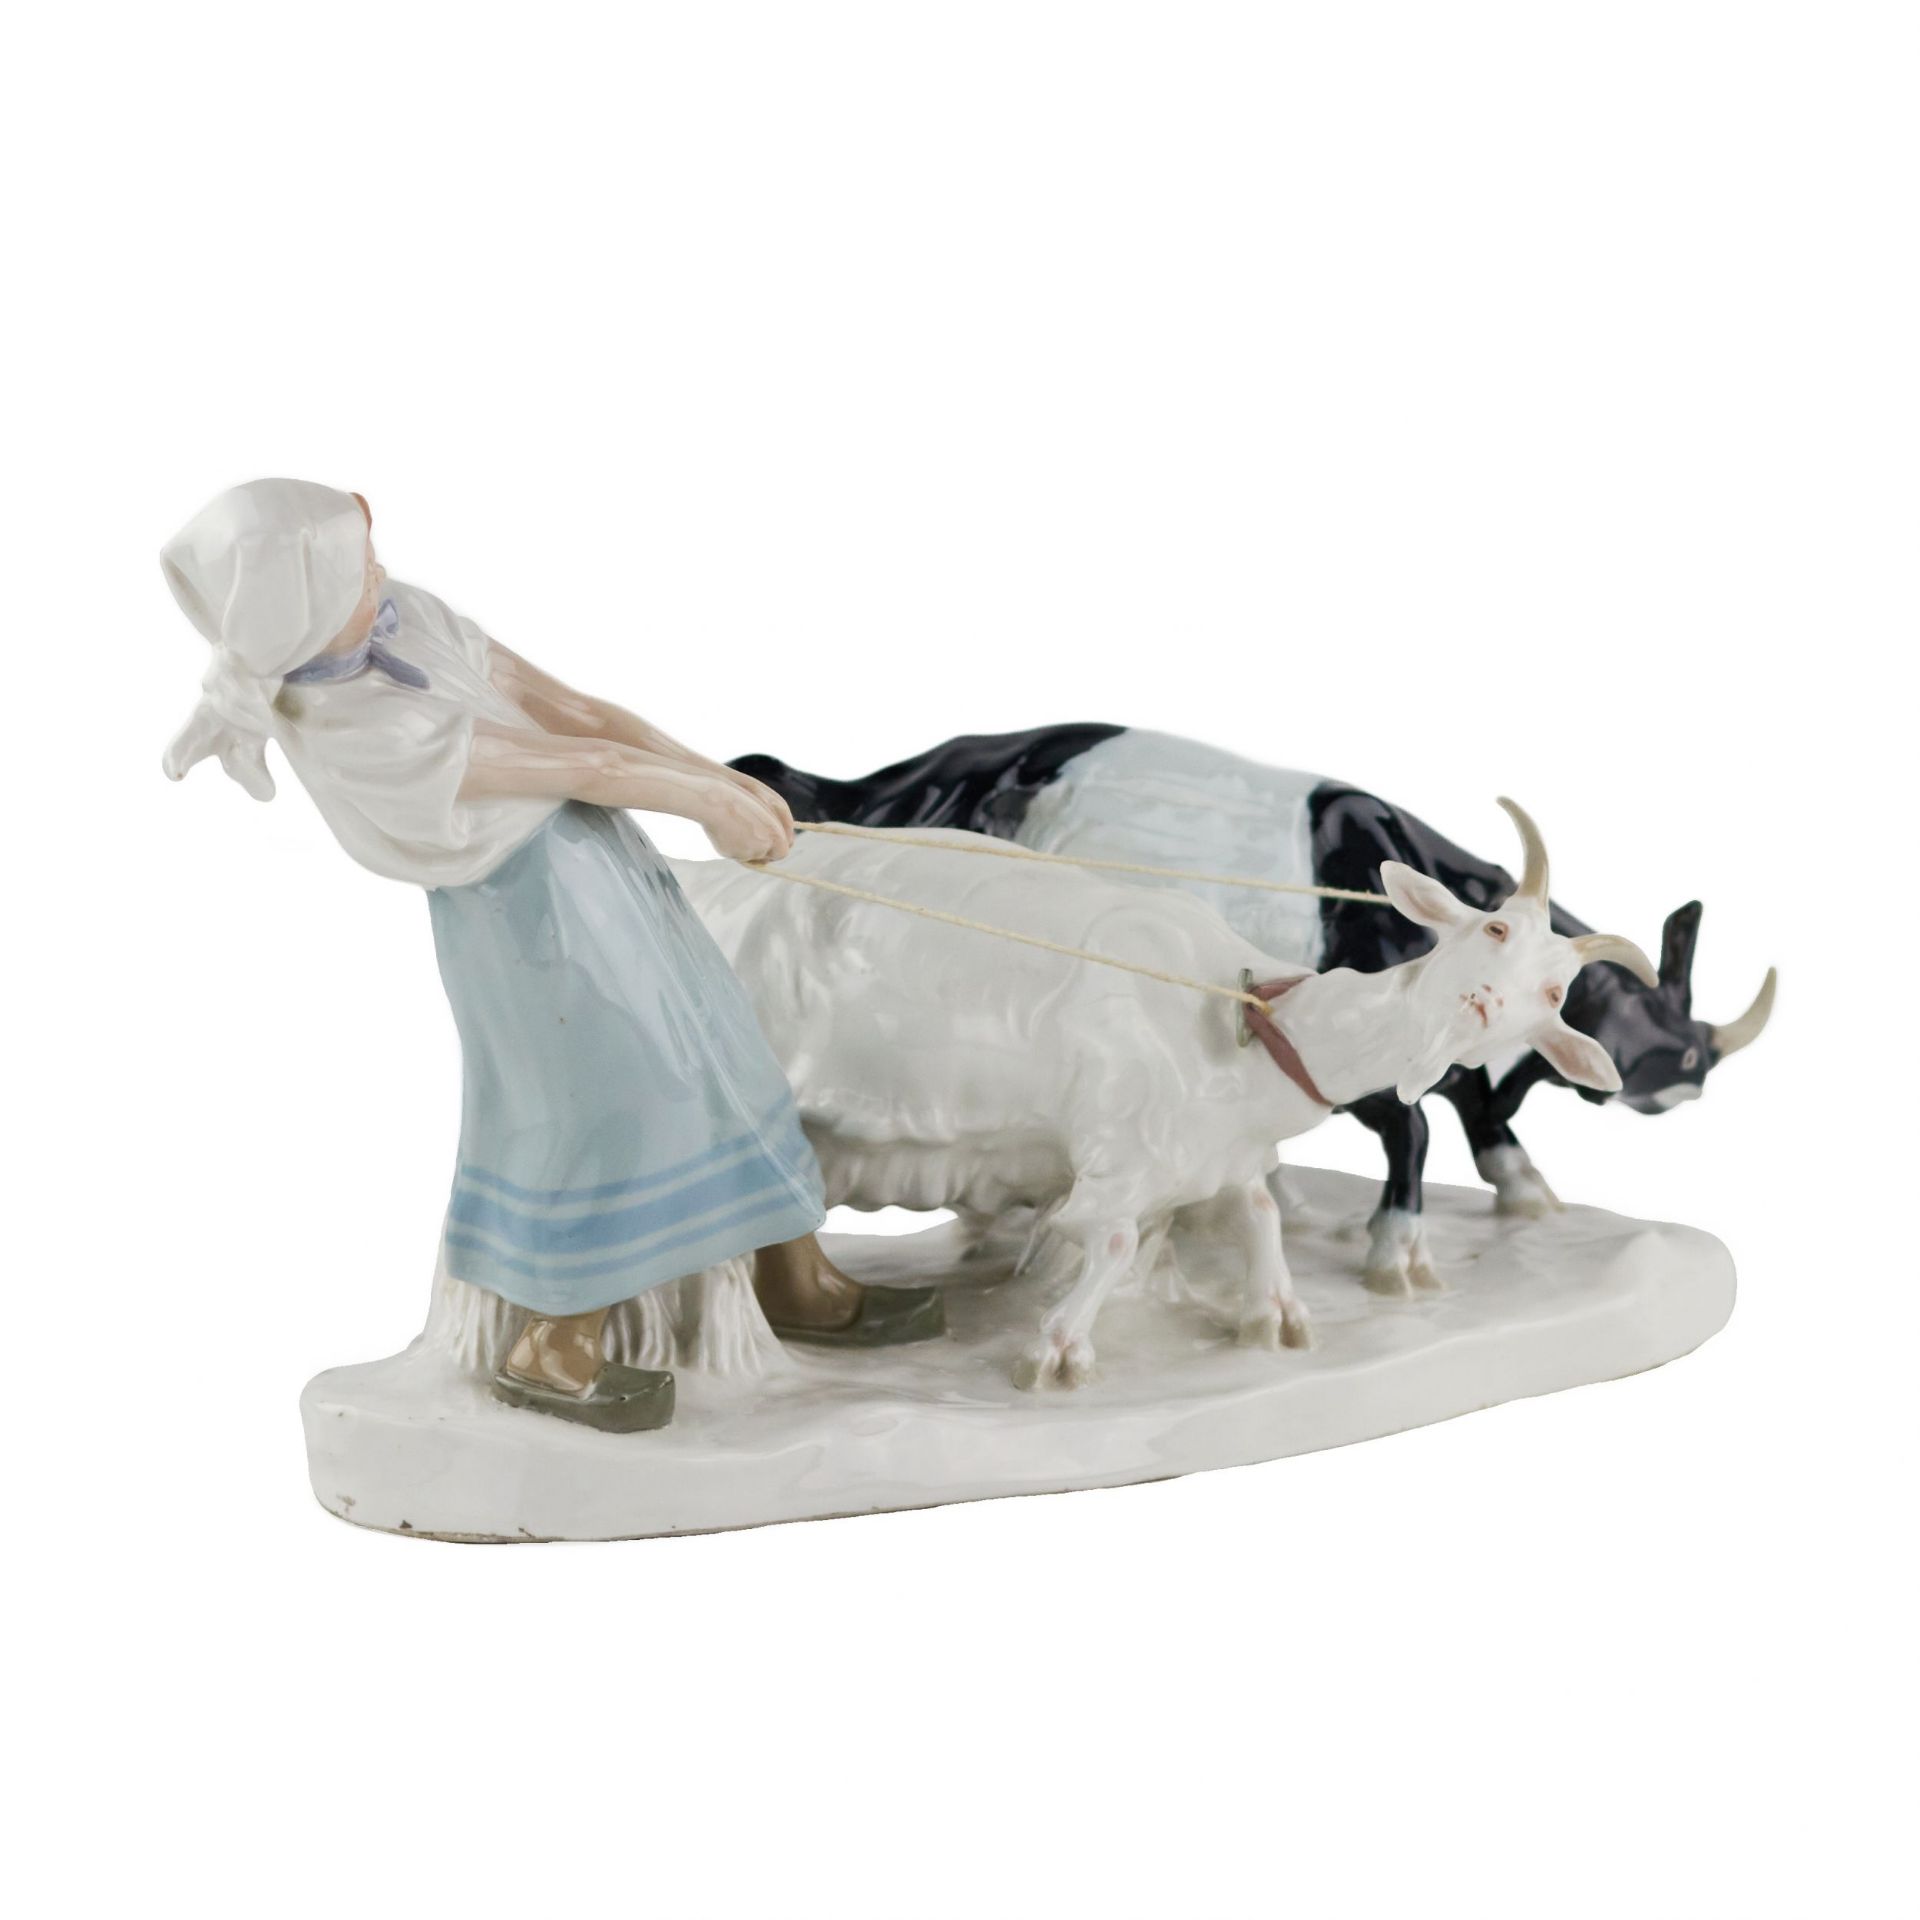 Porcelain composition Shepherdess with goats. Pilz, Otto. Meissen. 1850-1924. - Image 5 of 7